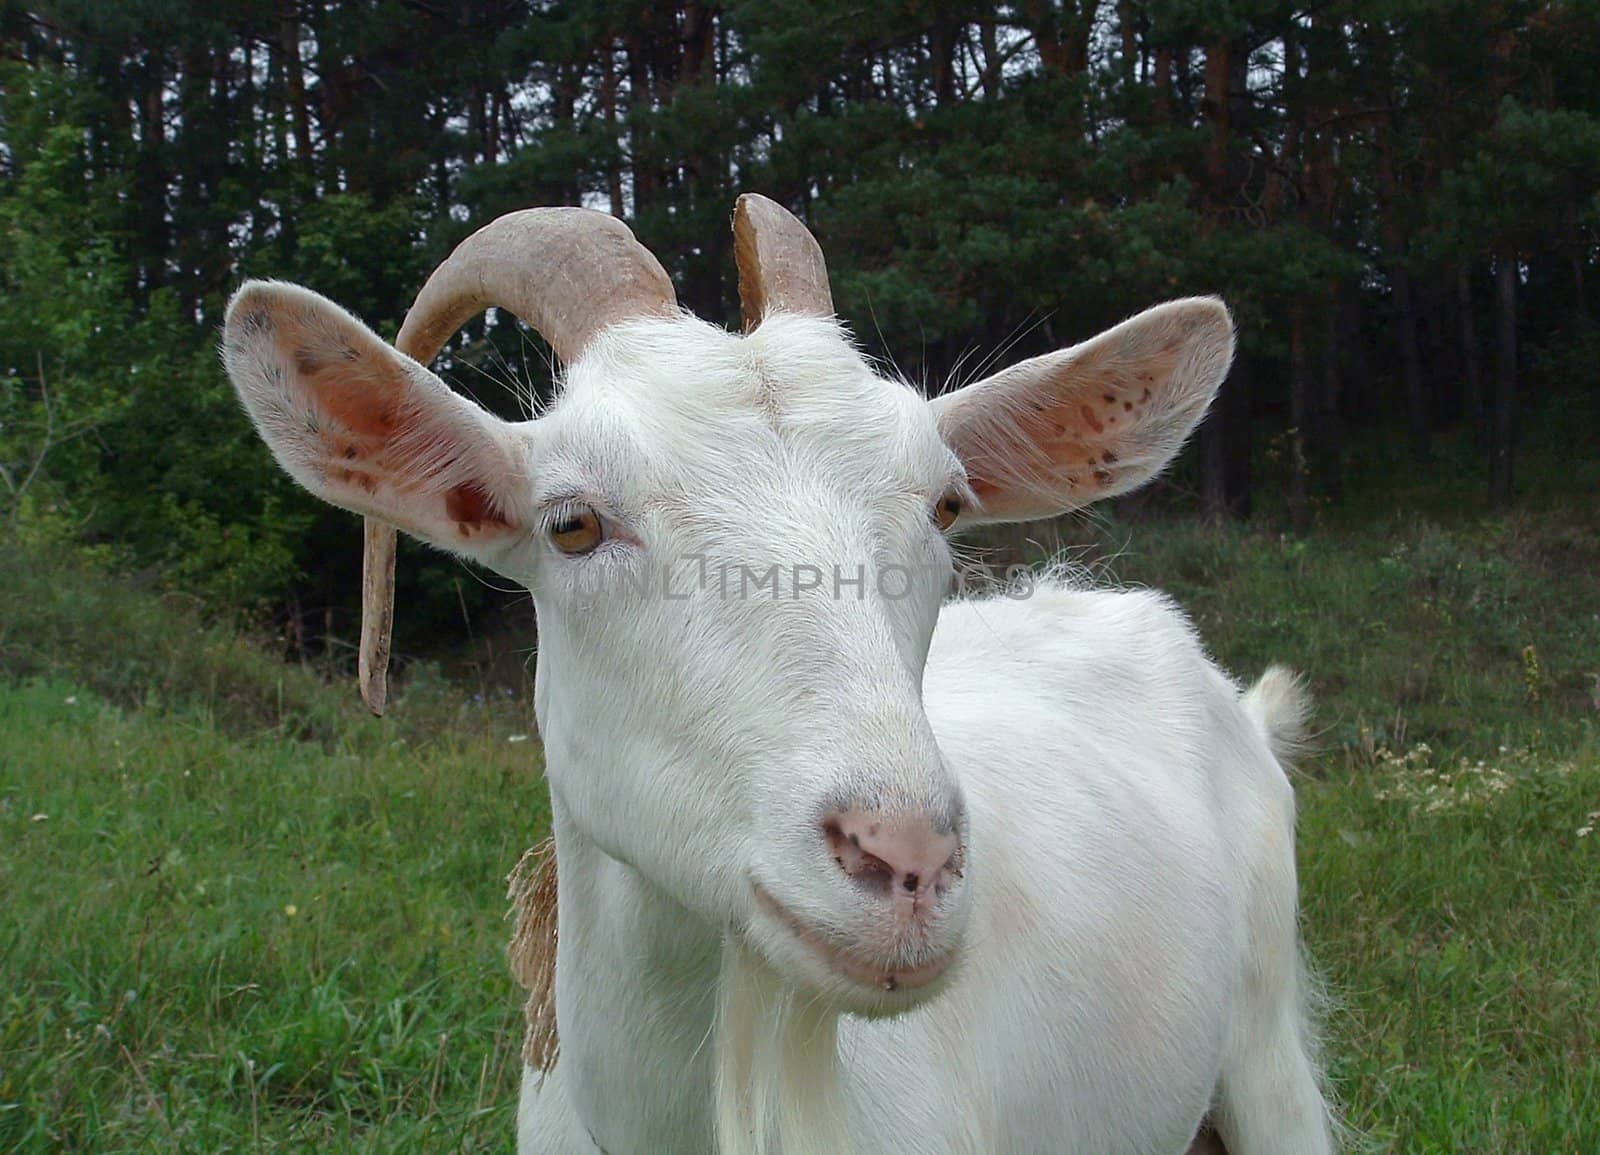 Charming white goat on a lawn on a background of a pine wood